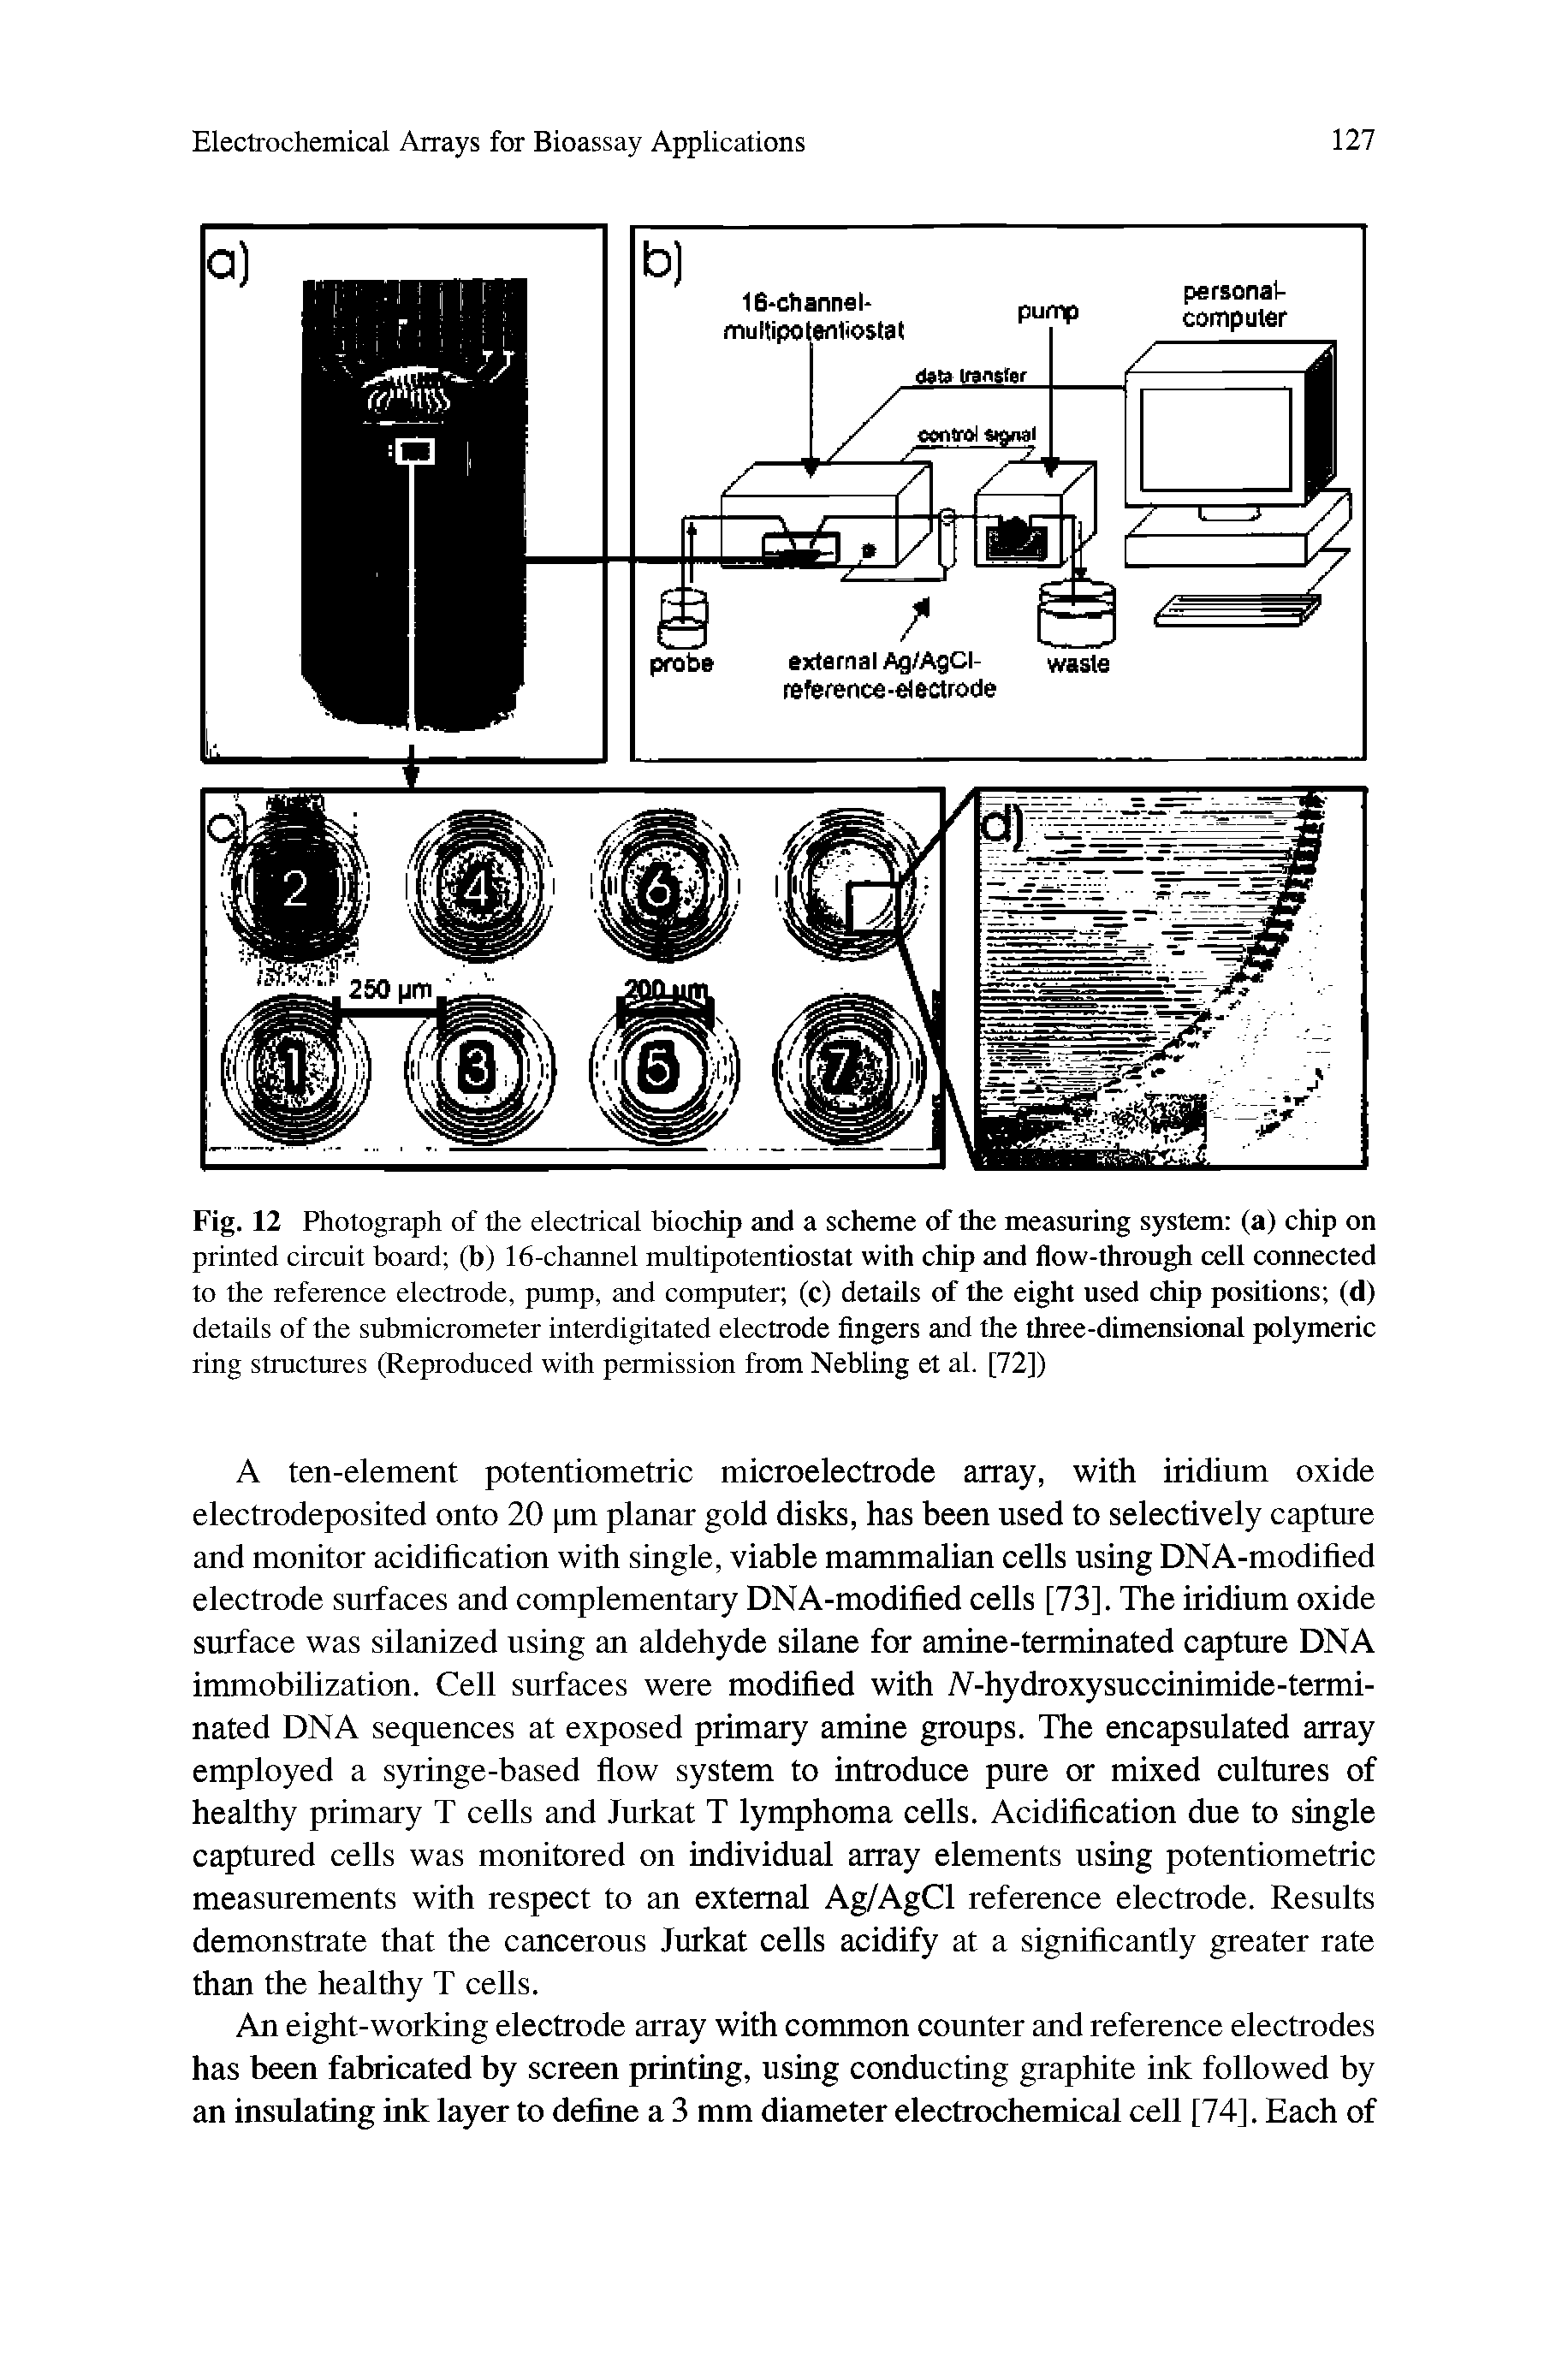 Fig. 12 Photograph of the electrical biochip and a scheme of the measuring system (a) chip on printed circuit board (b) 16-channel multipotentiostat with chip and flow-through cell connected to the reference electrode, pump, and computer (c) details of the eight used chip positions (d) details of the submicrometer interdigitated electrode fingers and the three-dimensional polymeric ring structures (Reproduced with permission from Nebling et al. [72])...